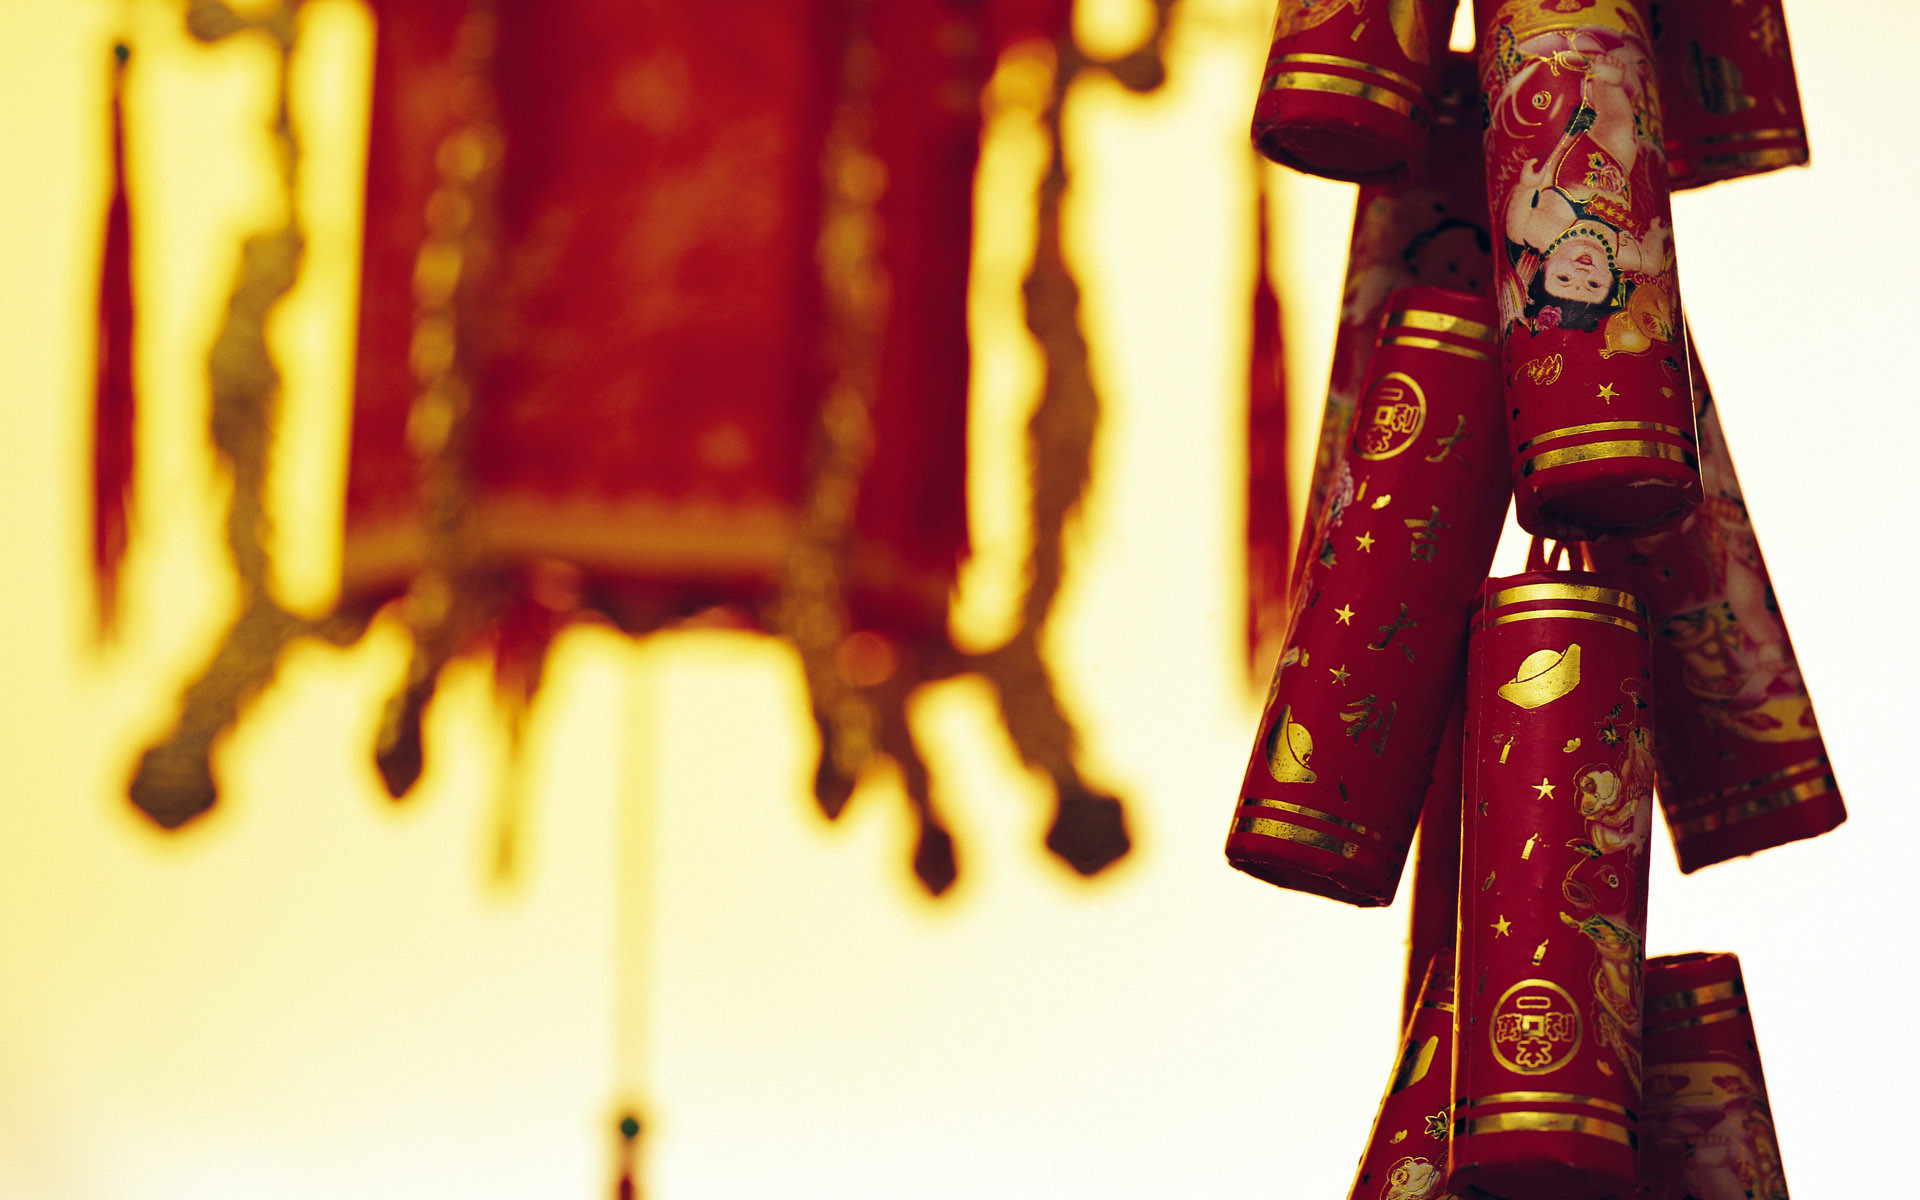 1920x1200 Wallpaper: Chinese New Year 2014 Free Wallpapers